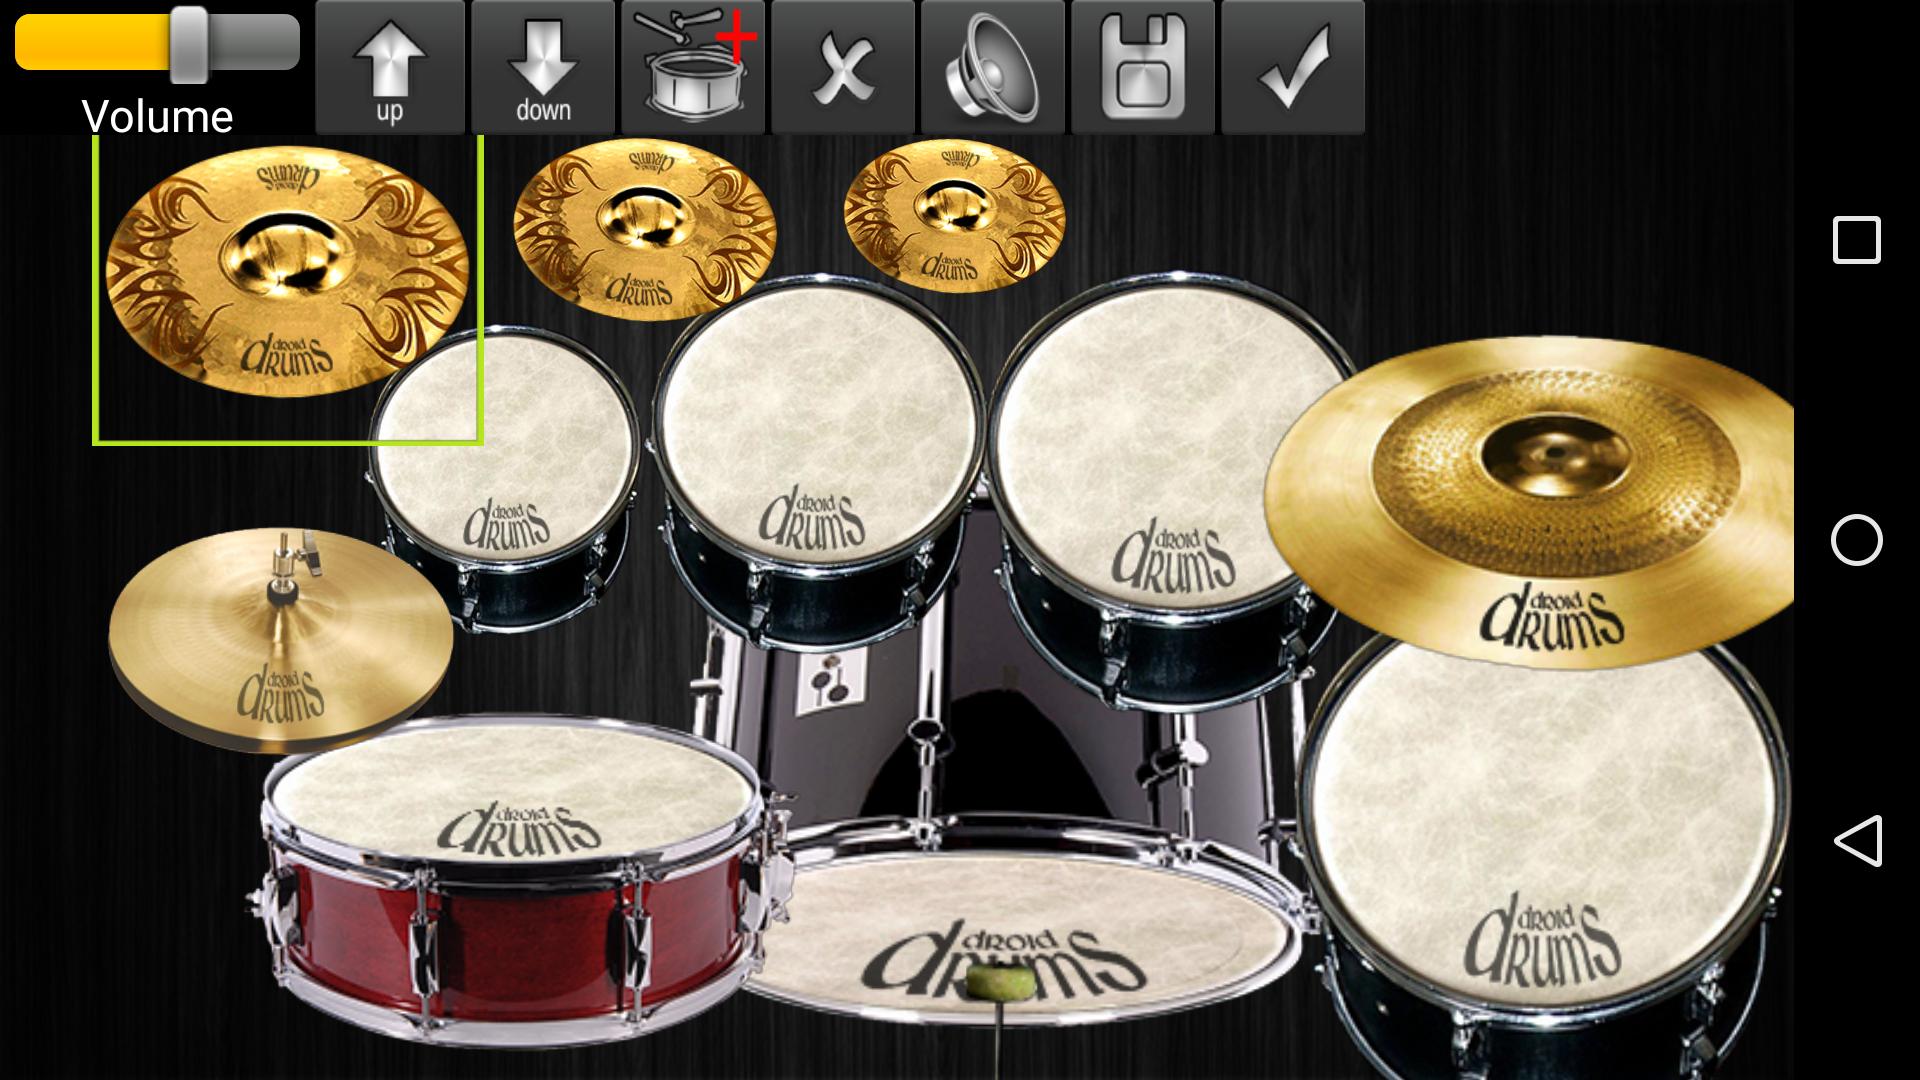 Drums Droid Hd 2016 Free For Android Apk Download - drum set roblox id